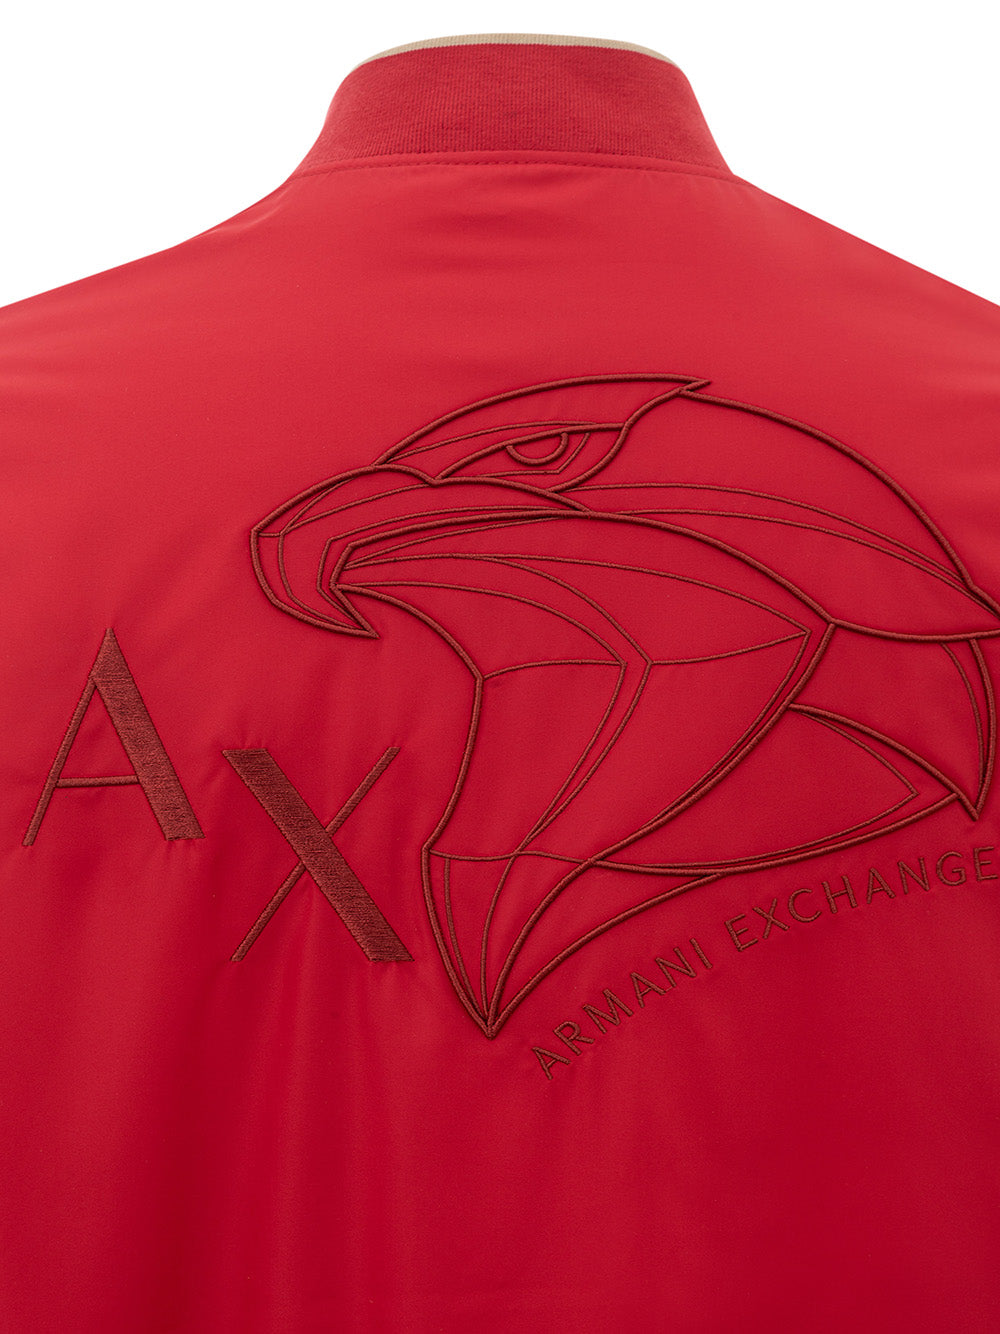 Red jacket in Armani Exchange technical fabric